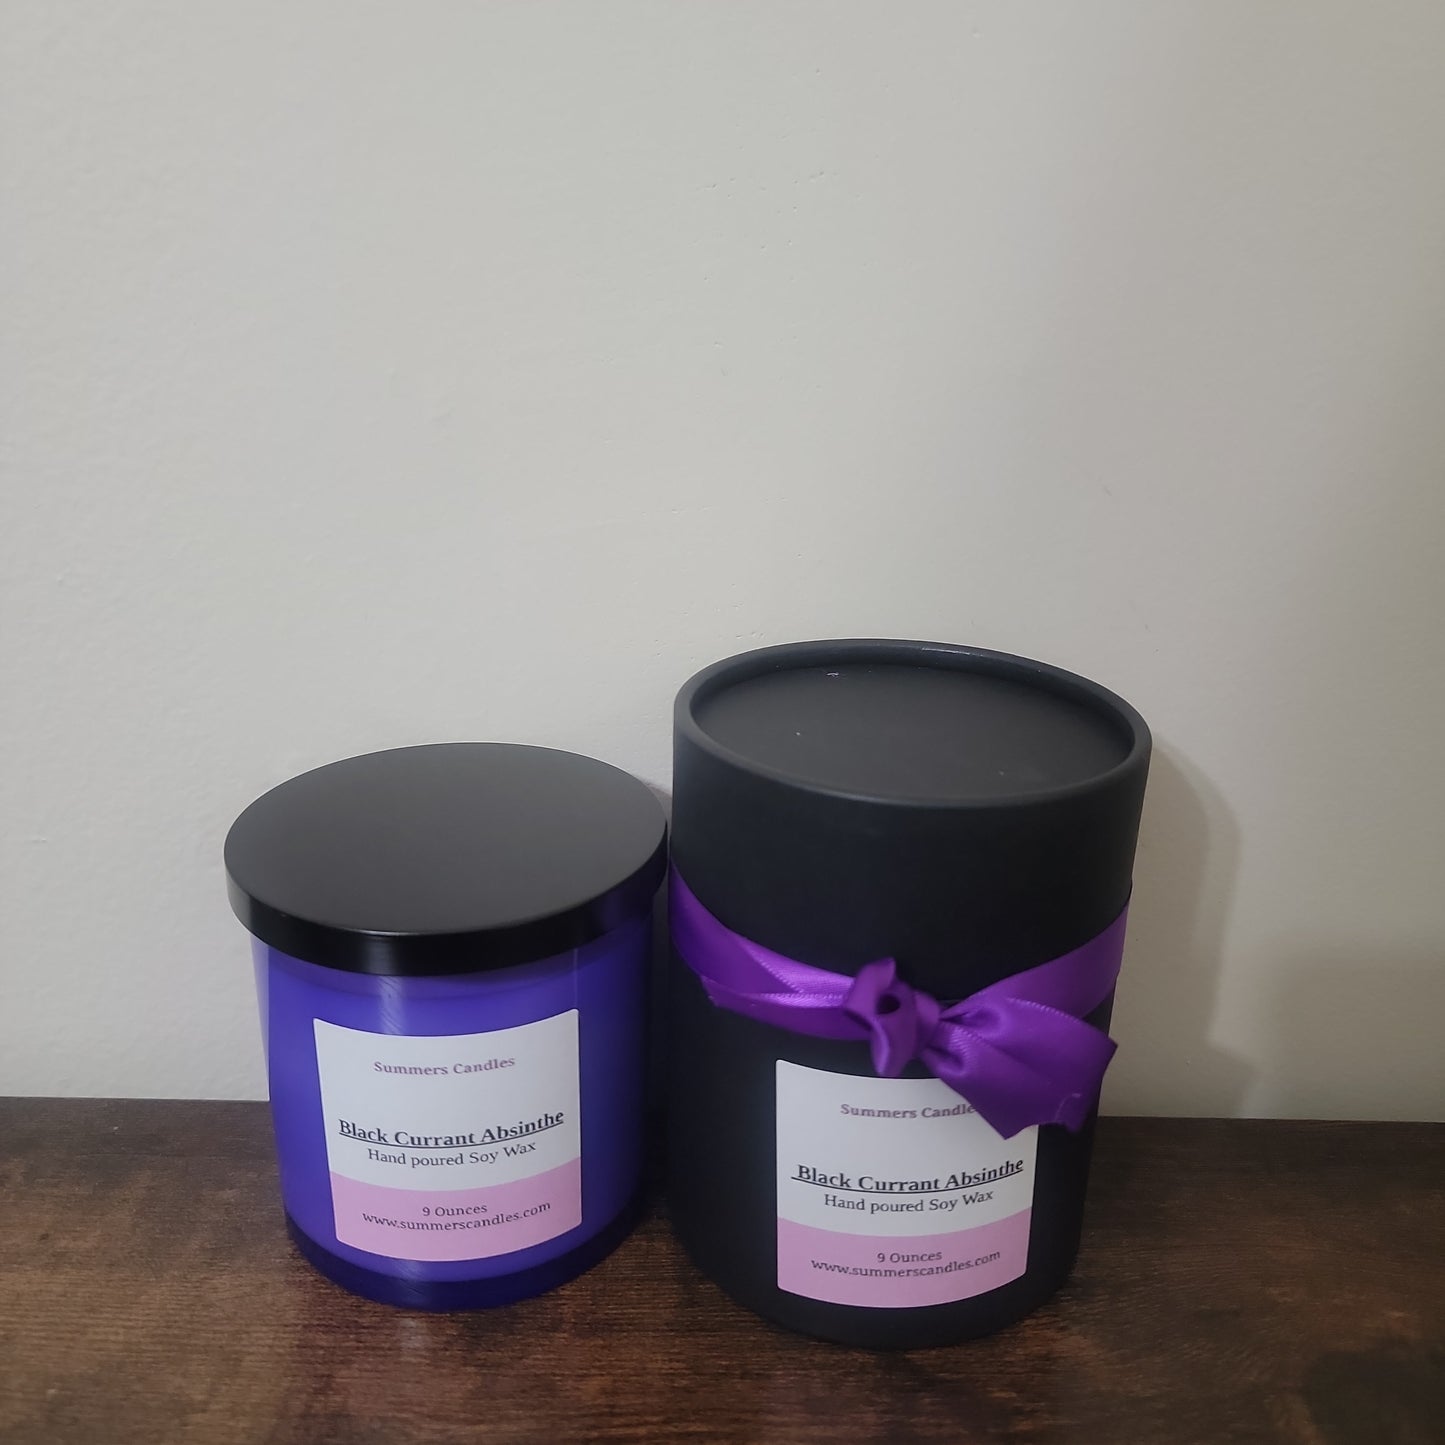 Black Currant and Absinthe Scented Candles - Summers Candles